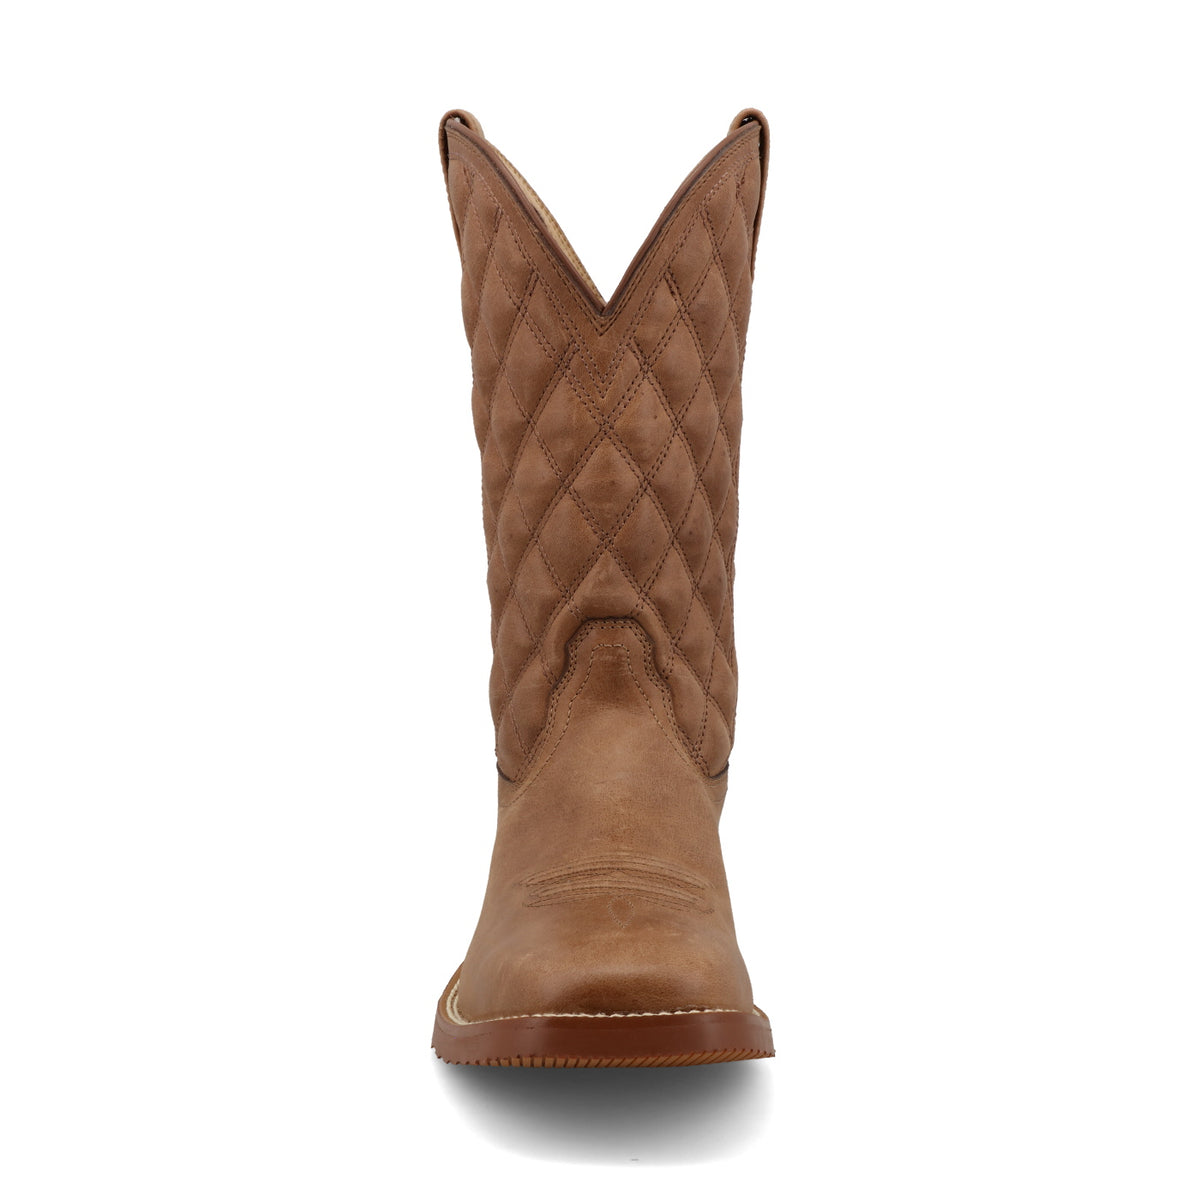 Twisted X Women's Ginger Tech X Square Toe Western Boot